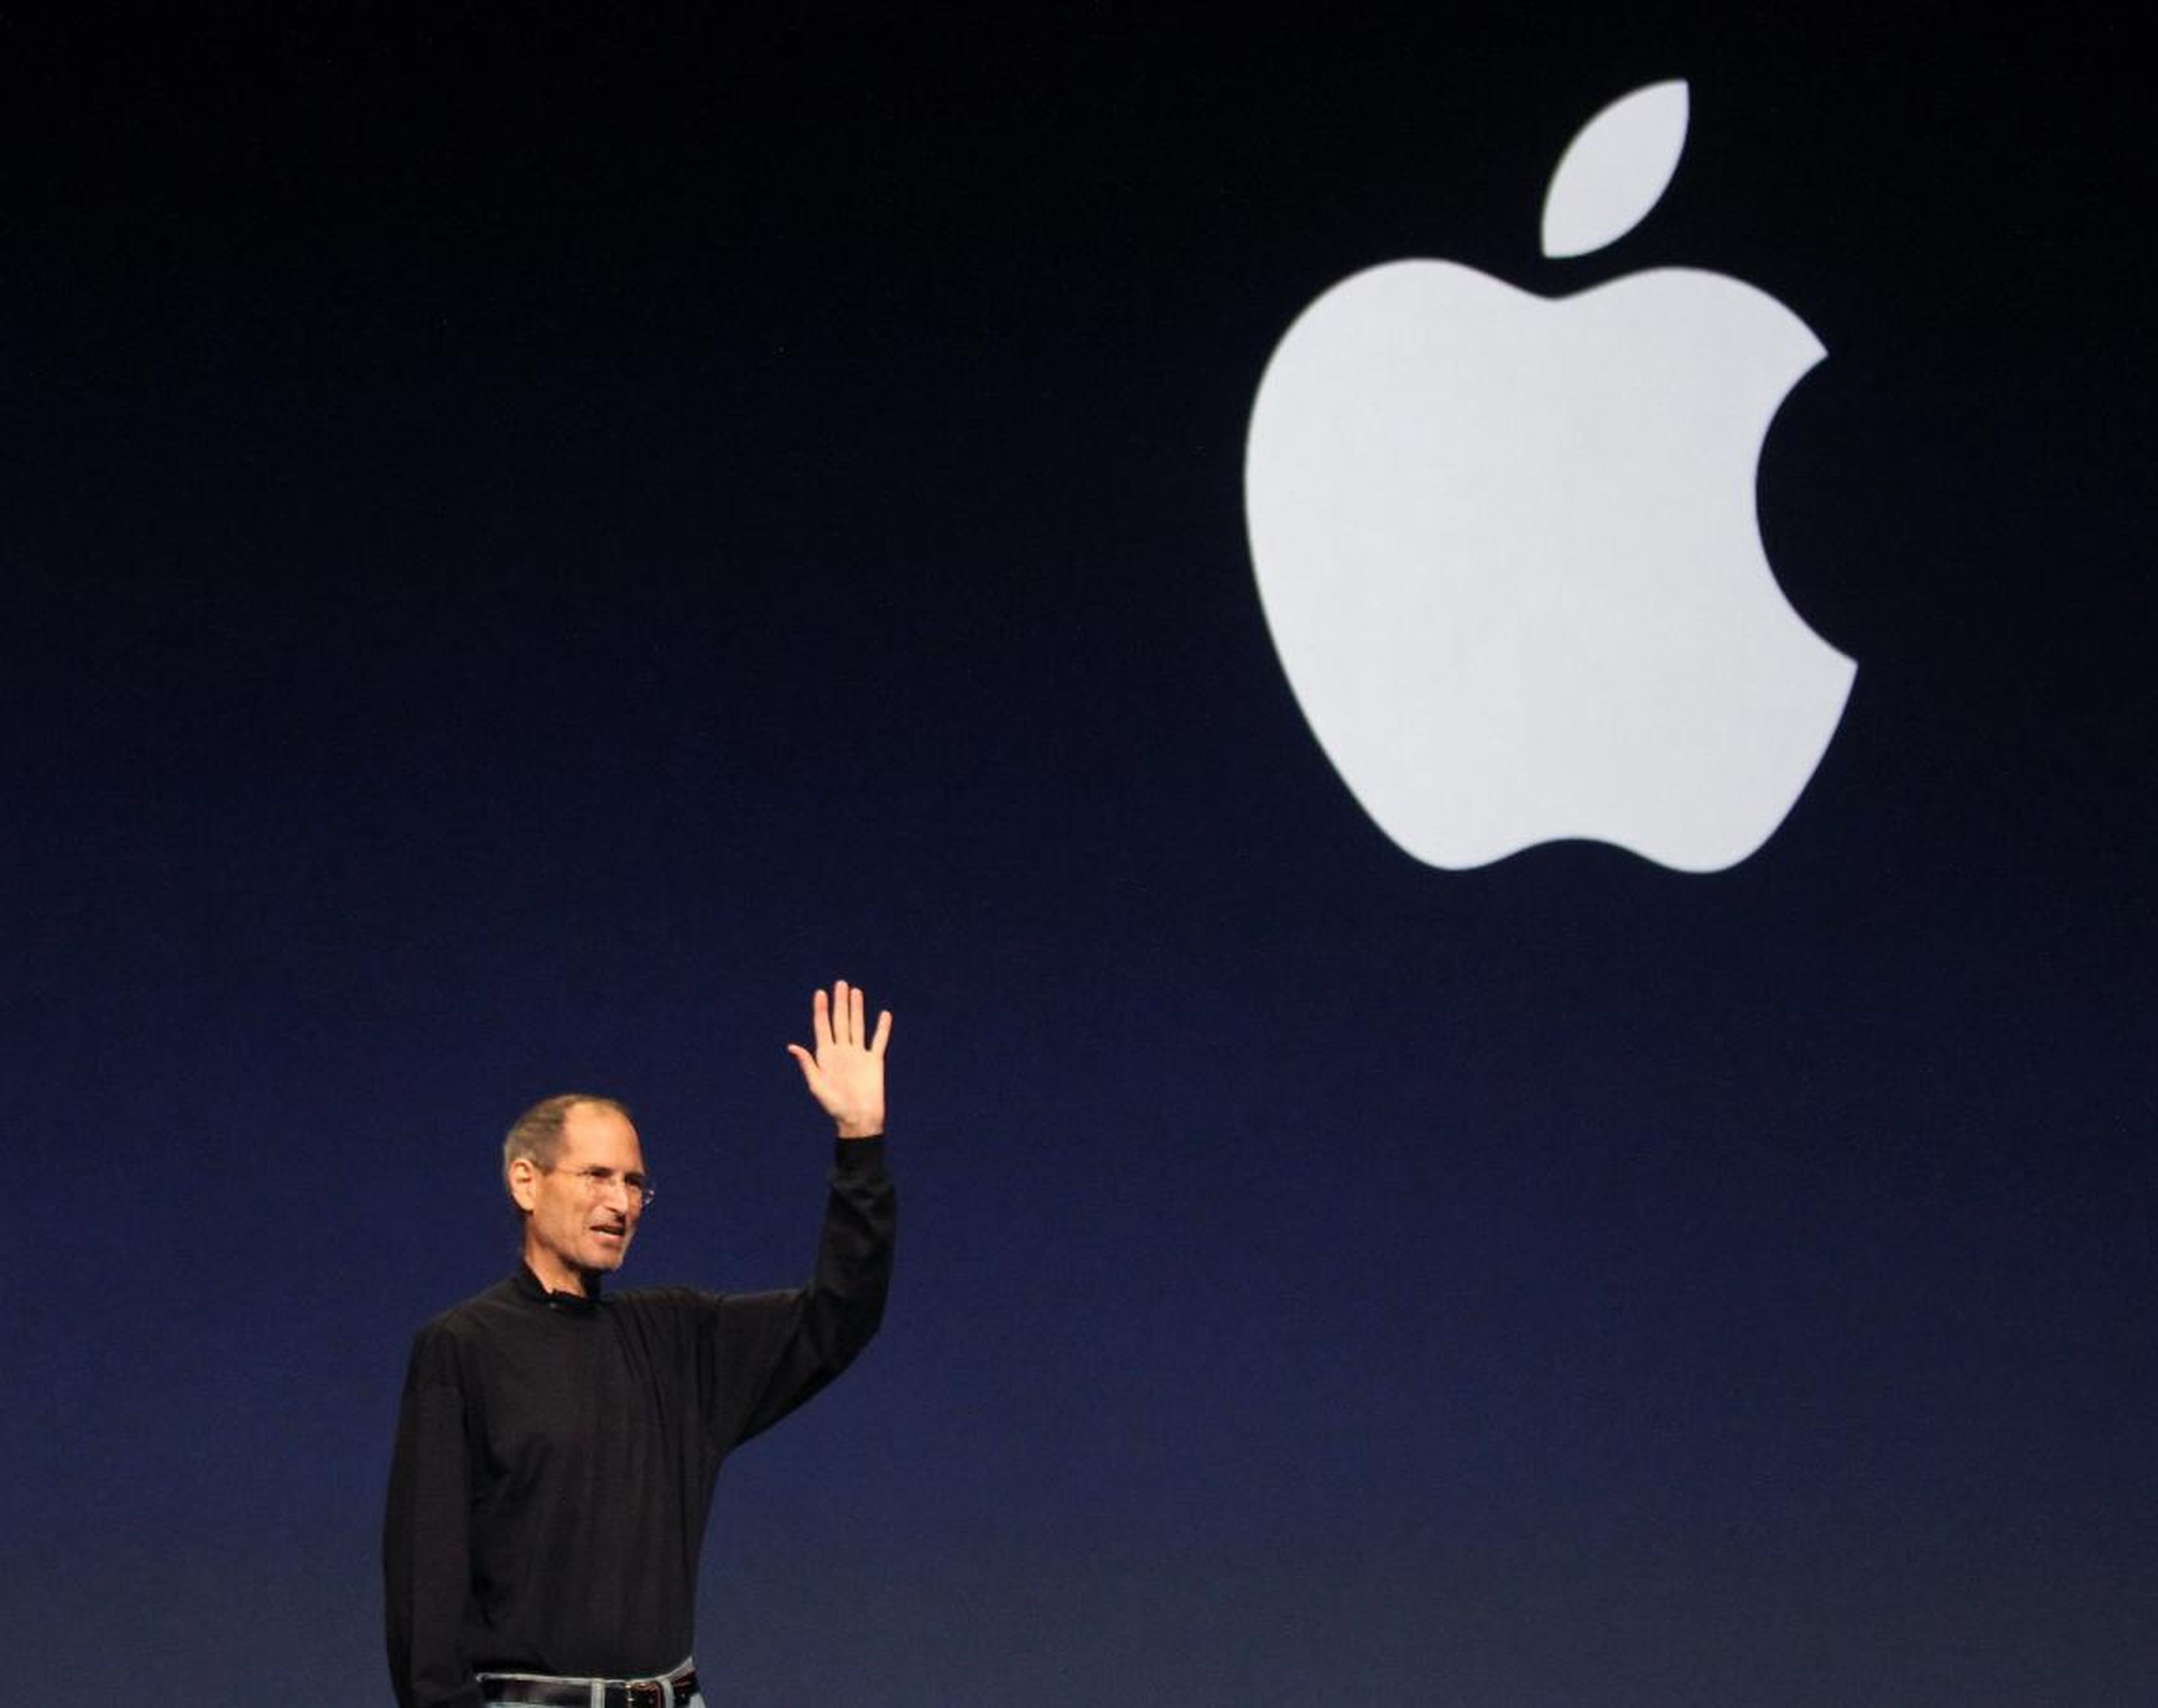 In early 2011, during the last of his medical leaves, Jobs would give his final two product-announcement presentations: one in March for the iPad 2, and one in June for the iCloud service.